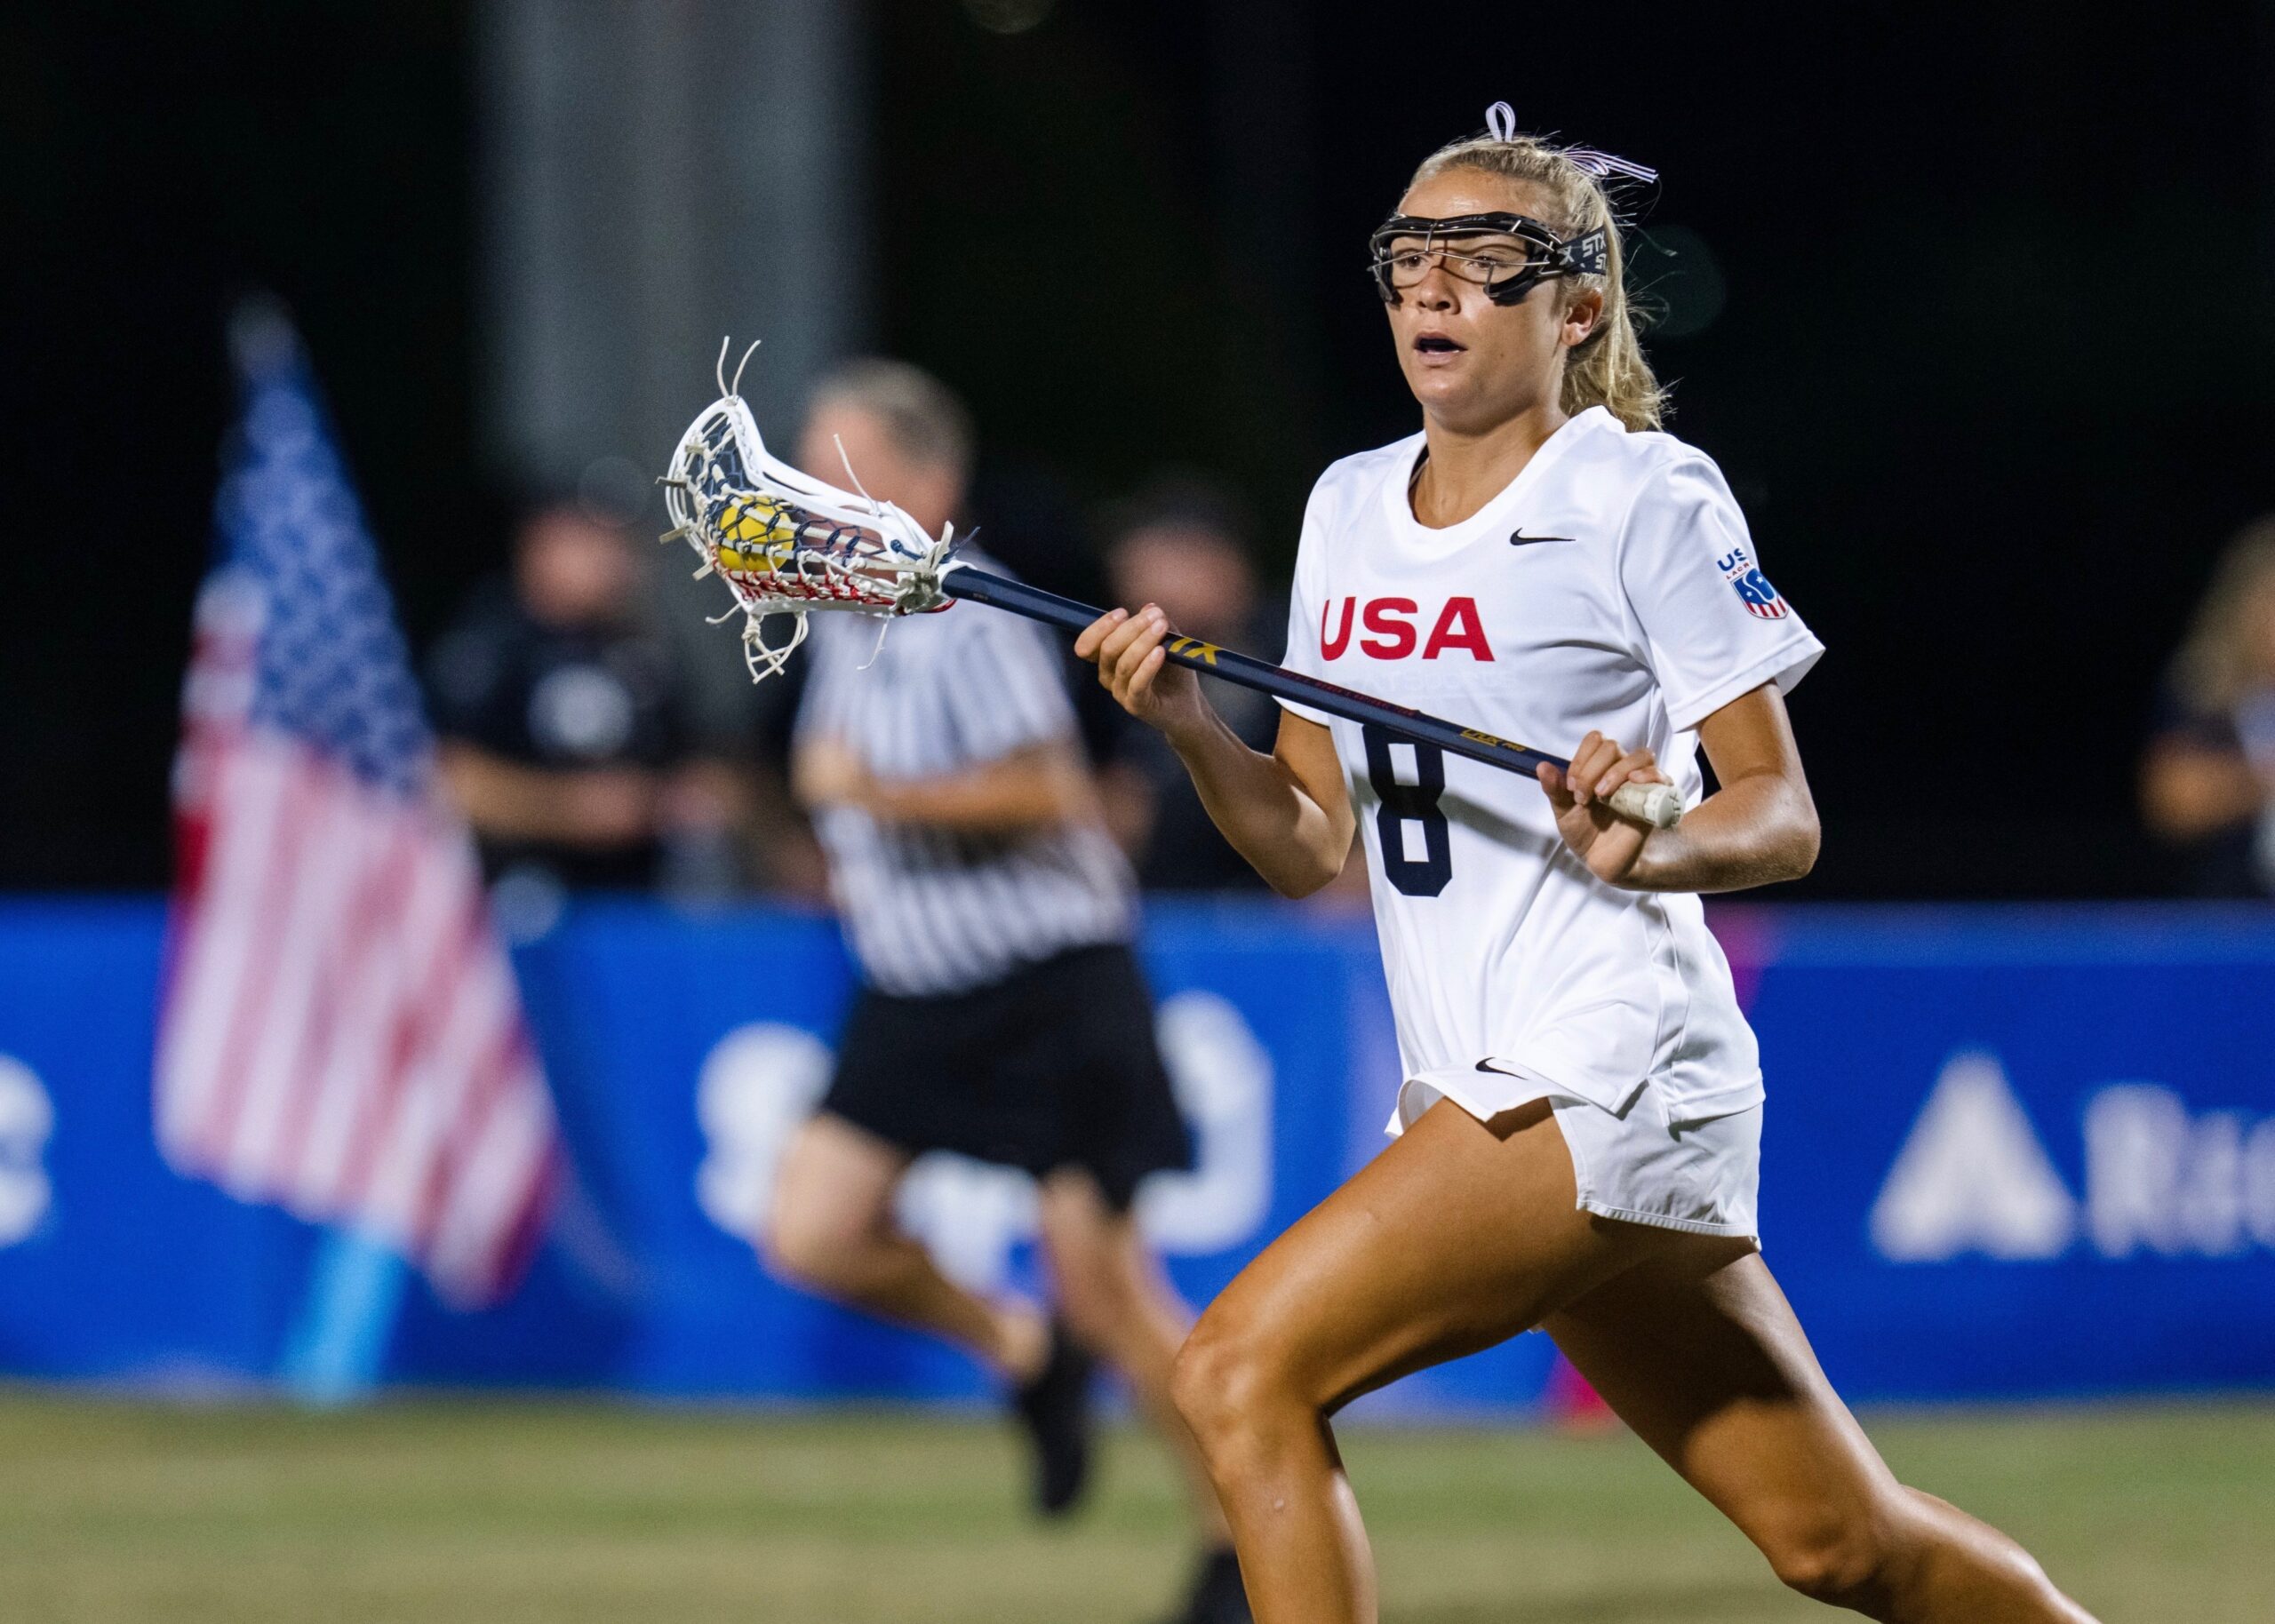 Belle Smith, who competed for Westhampton Beach, won a national championship with Boston College as a freshman and competed against the University of North Carolina in the NCAA finals this past season. USA LACROSSE